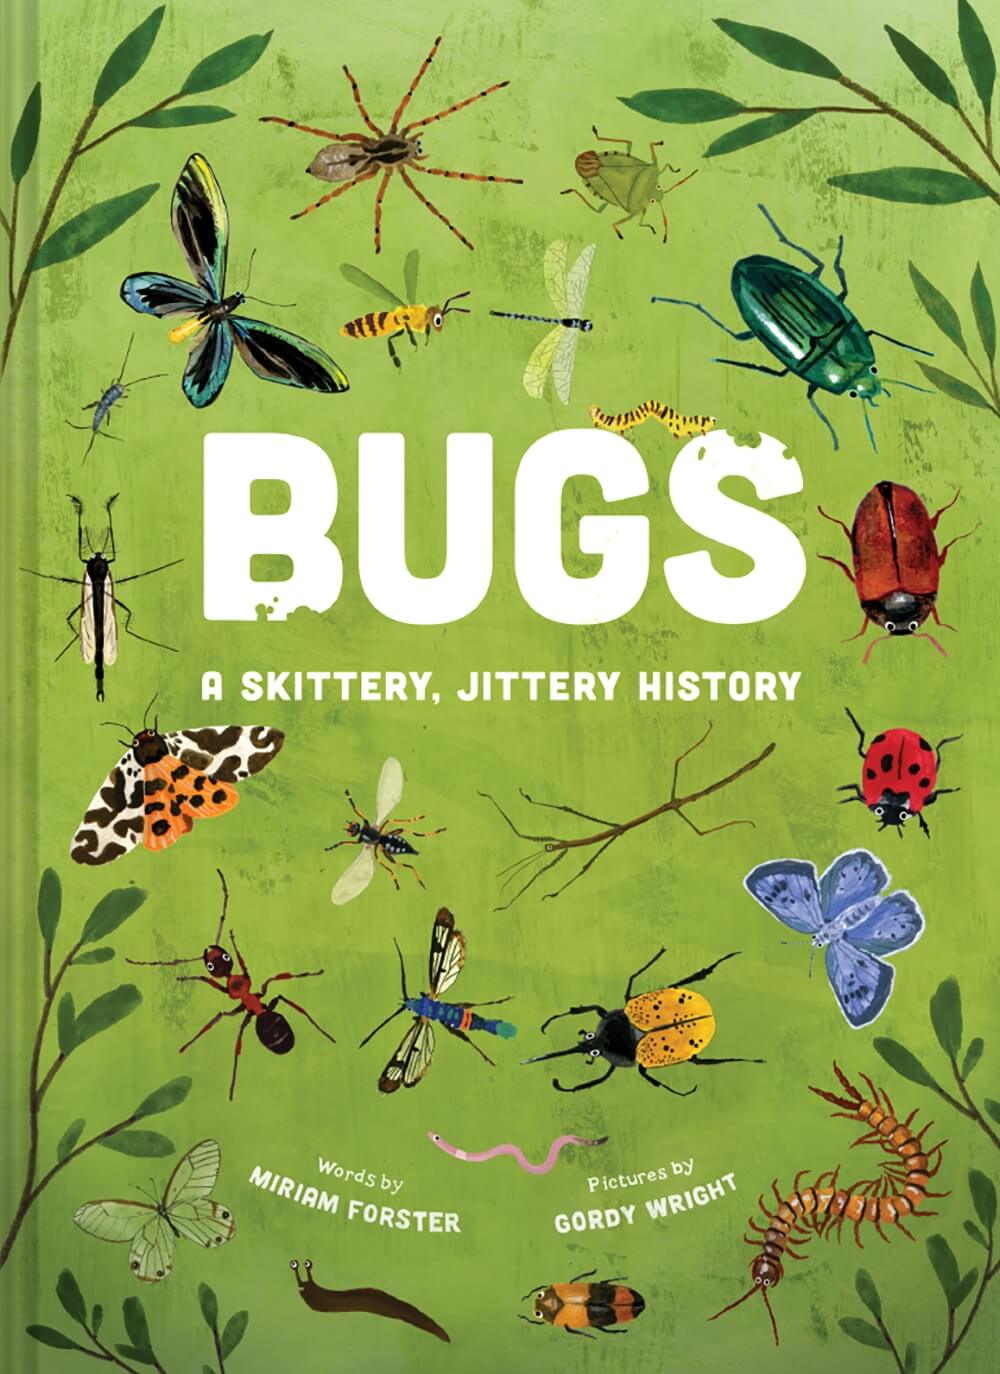 Photograph of book cover of Bugs: A Skitty Jittery History. Features a green background with illustrations of bugs and leaves.